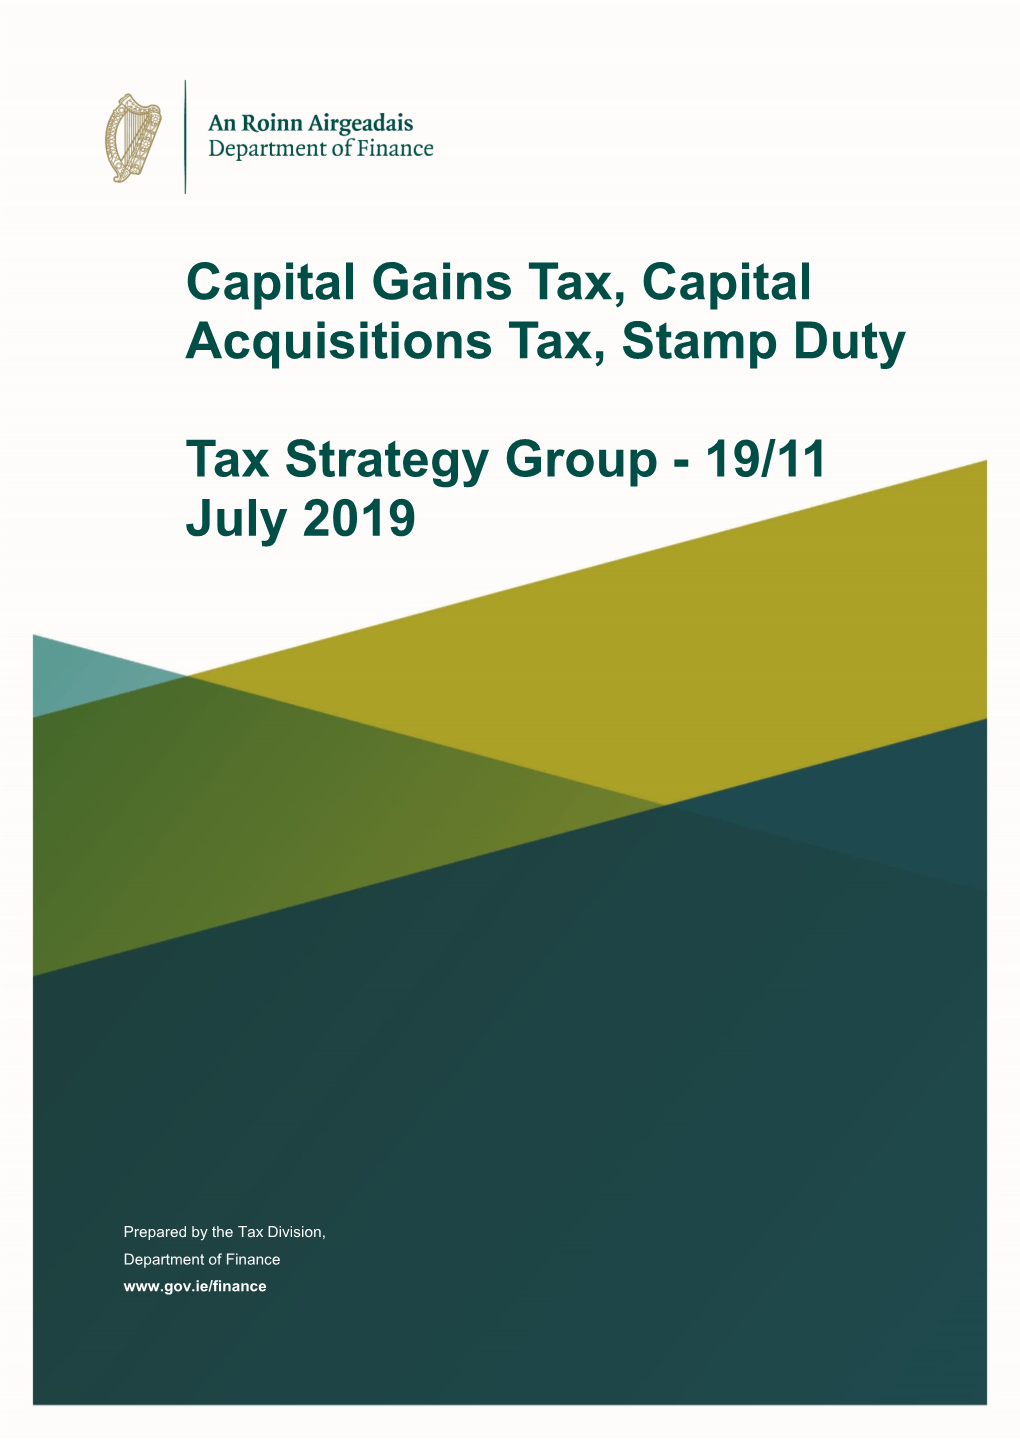 Capital Gains Tax, Capital Acquisitions Tax, Stamp Duty